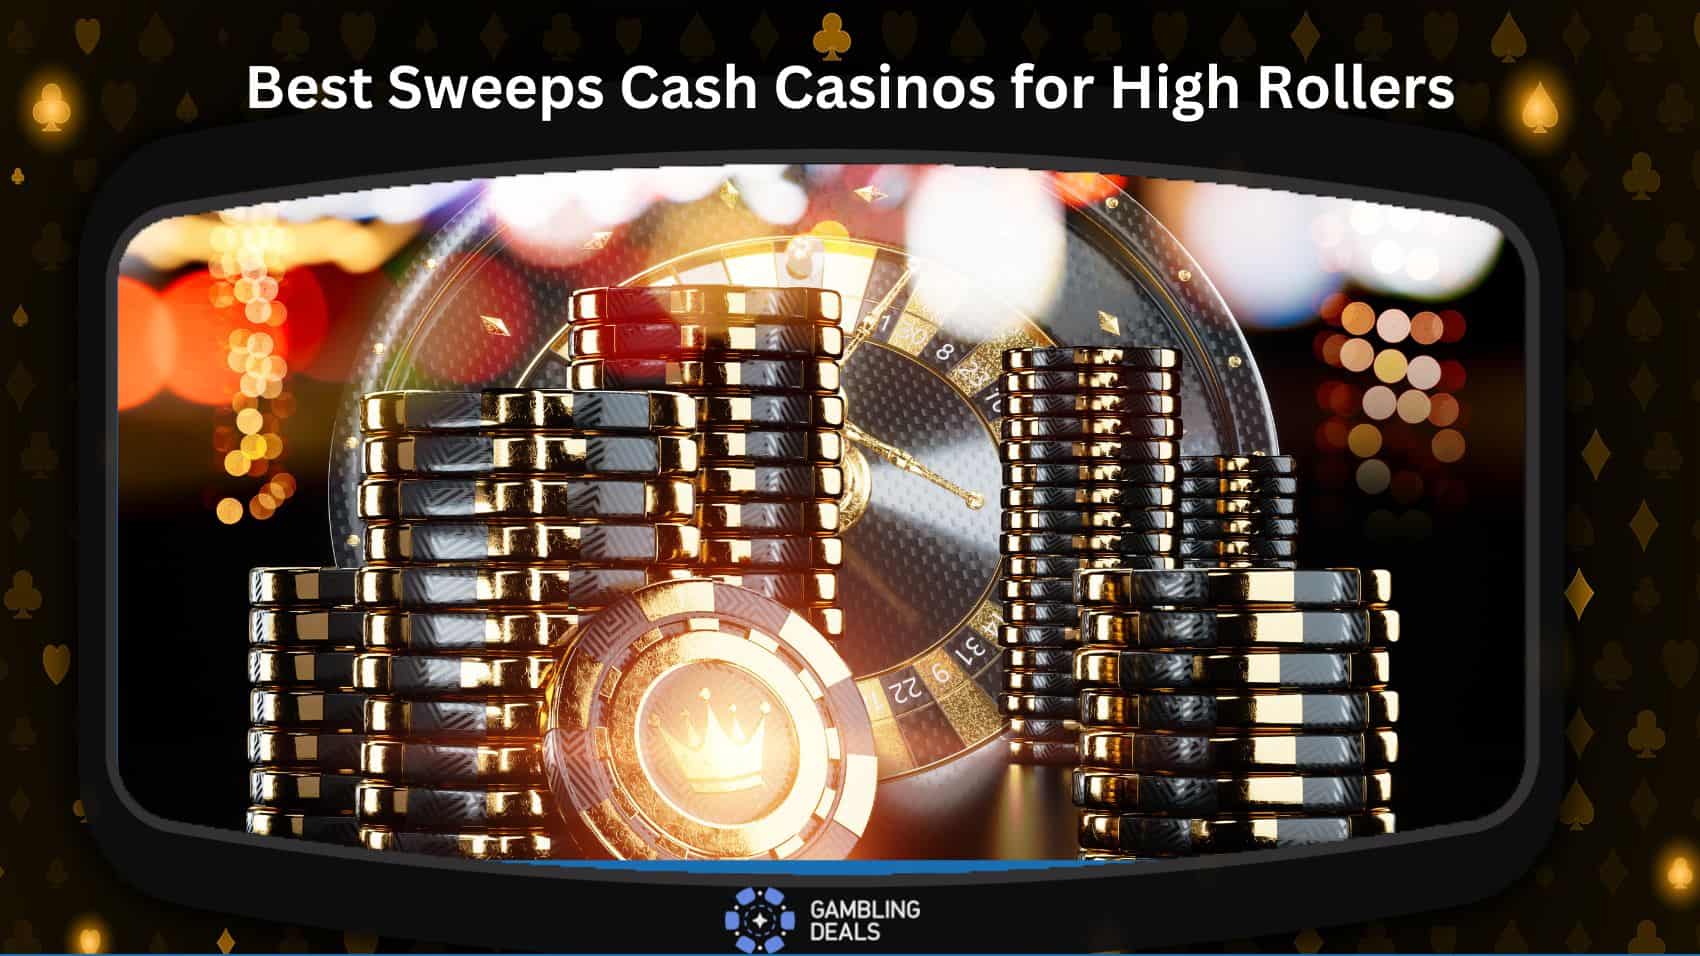 Best Sweeps Cash Casinos for High Rollers